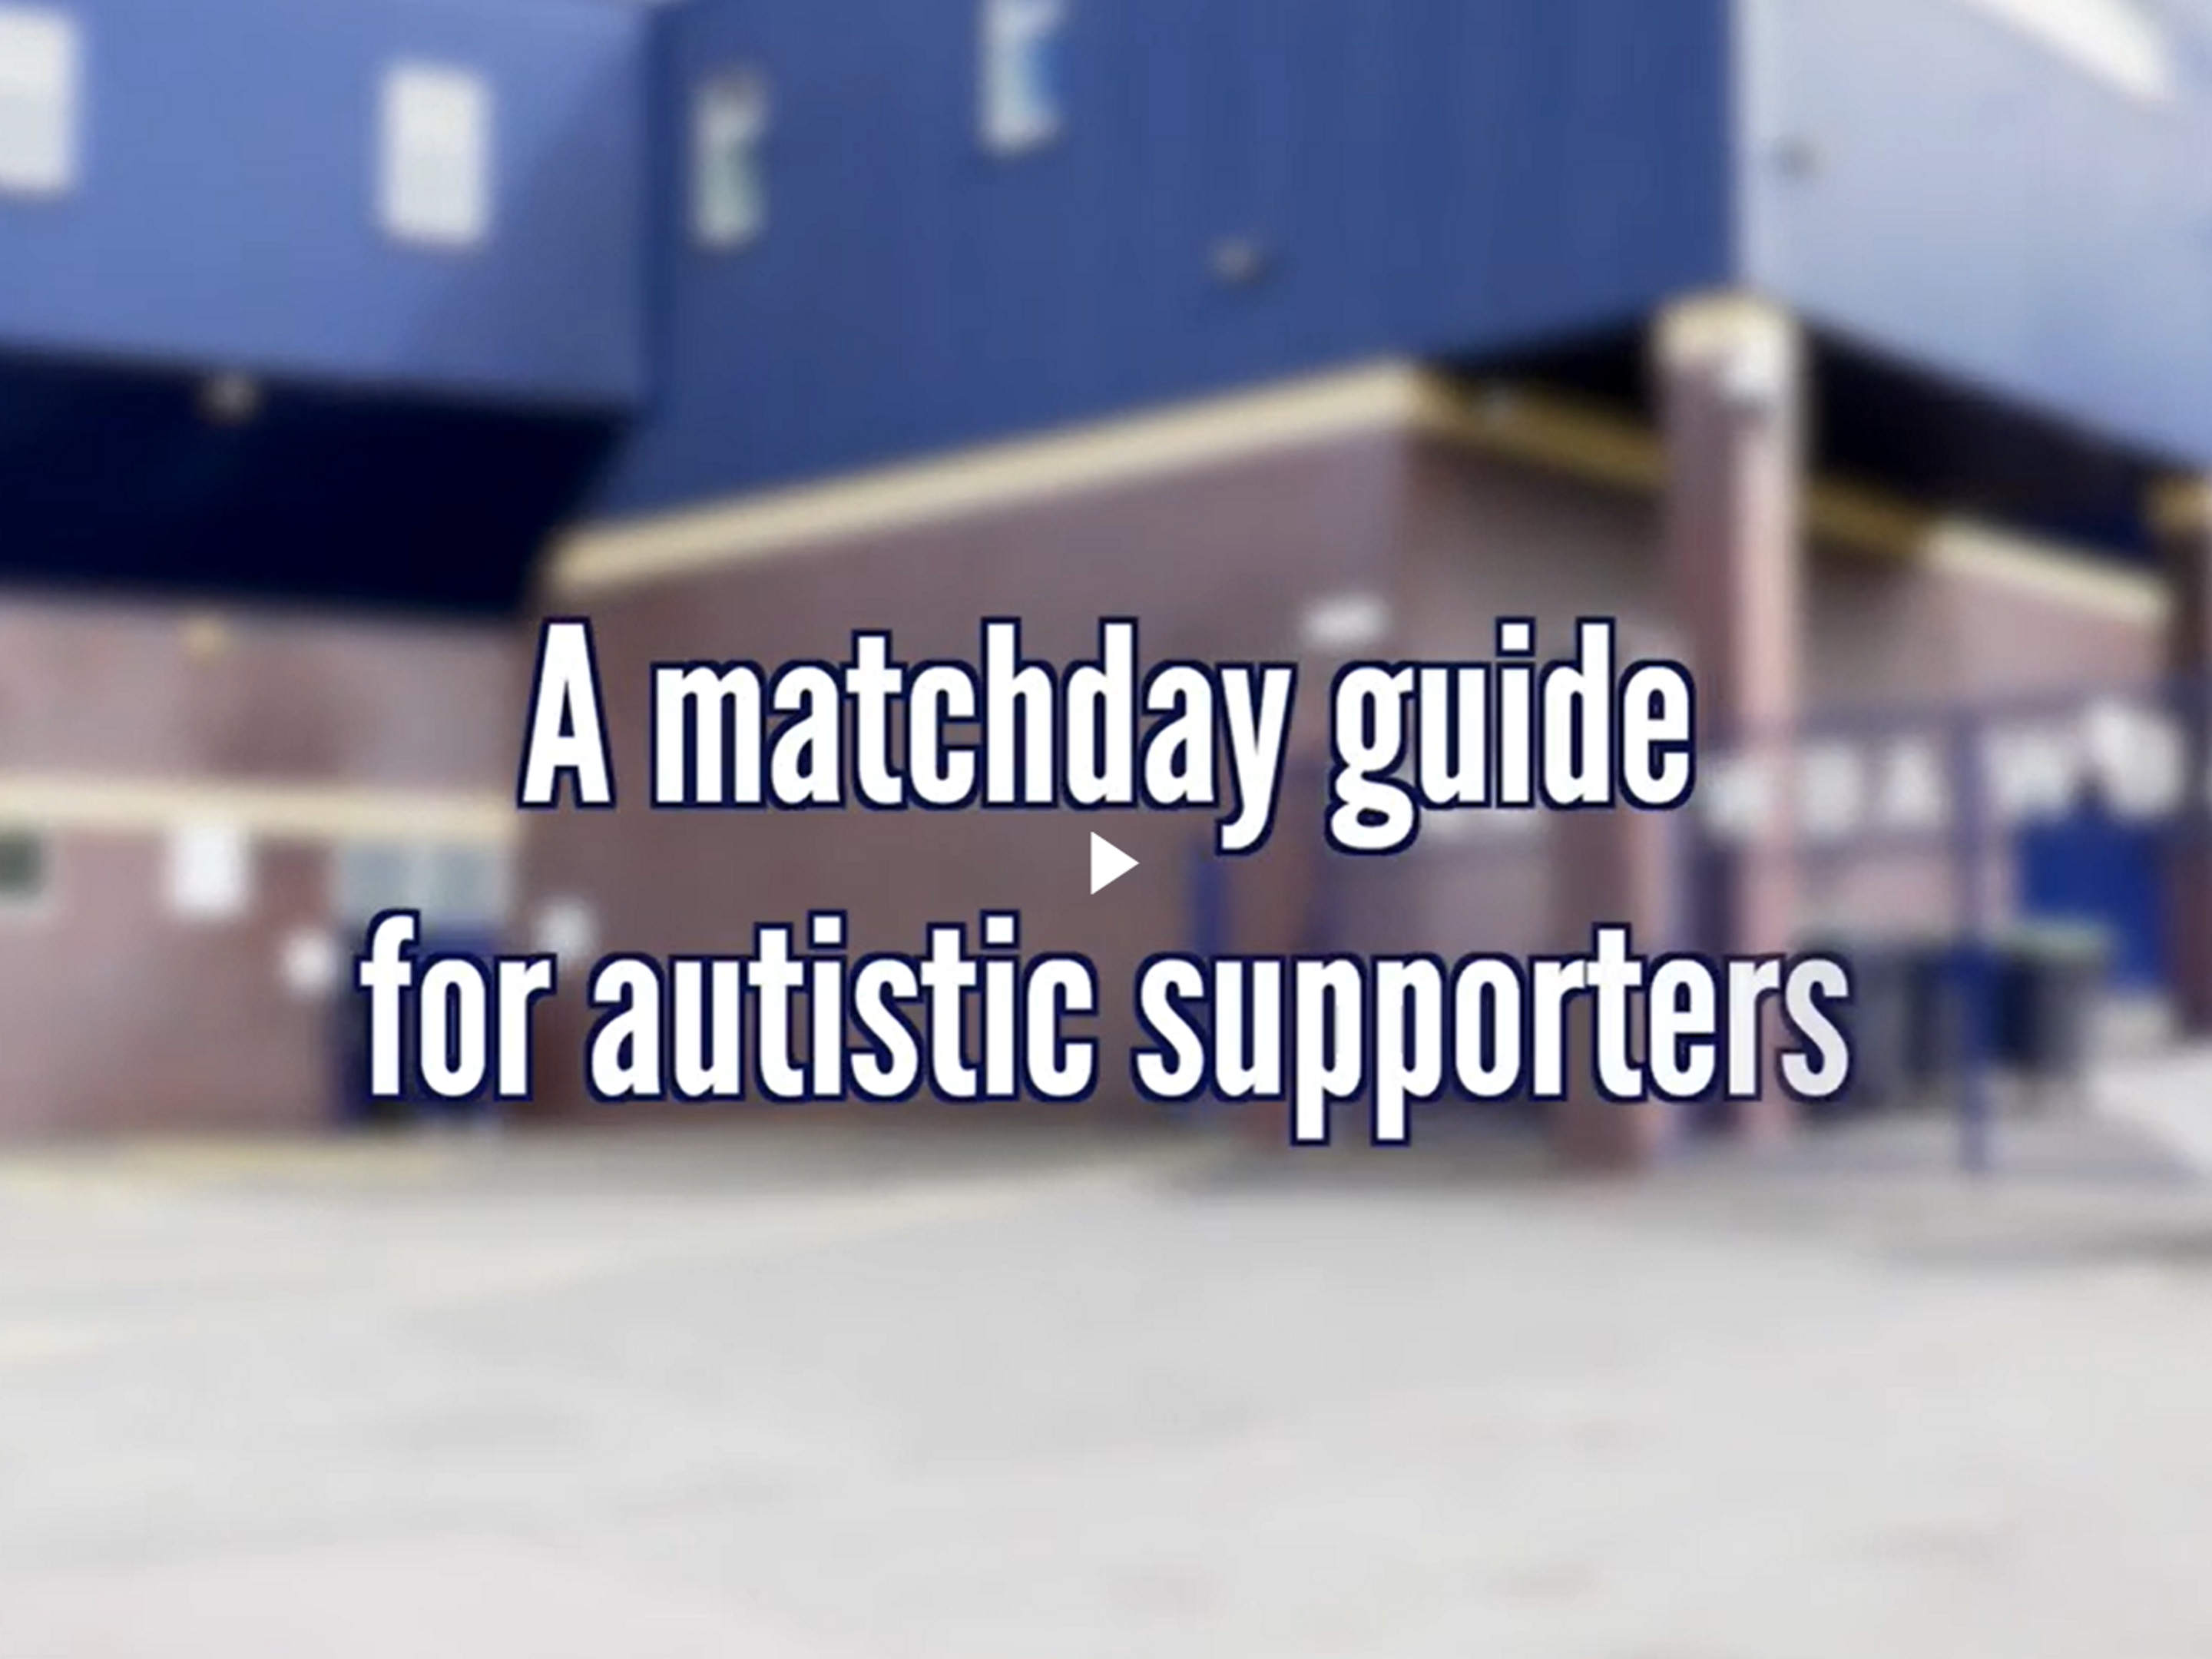 Matchday experience for supporters with autism